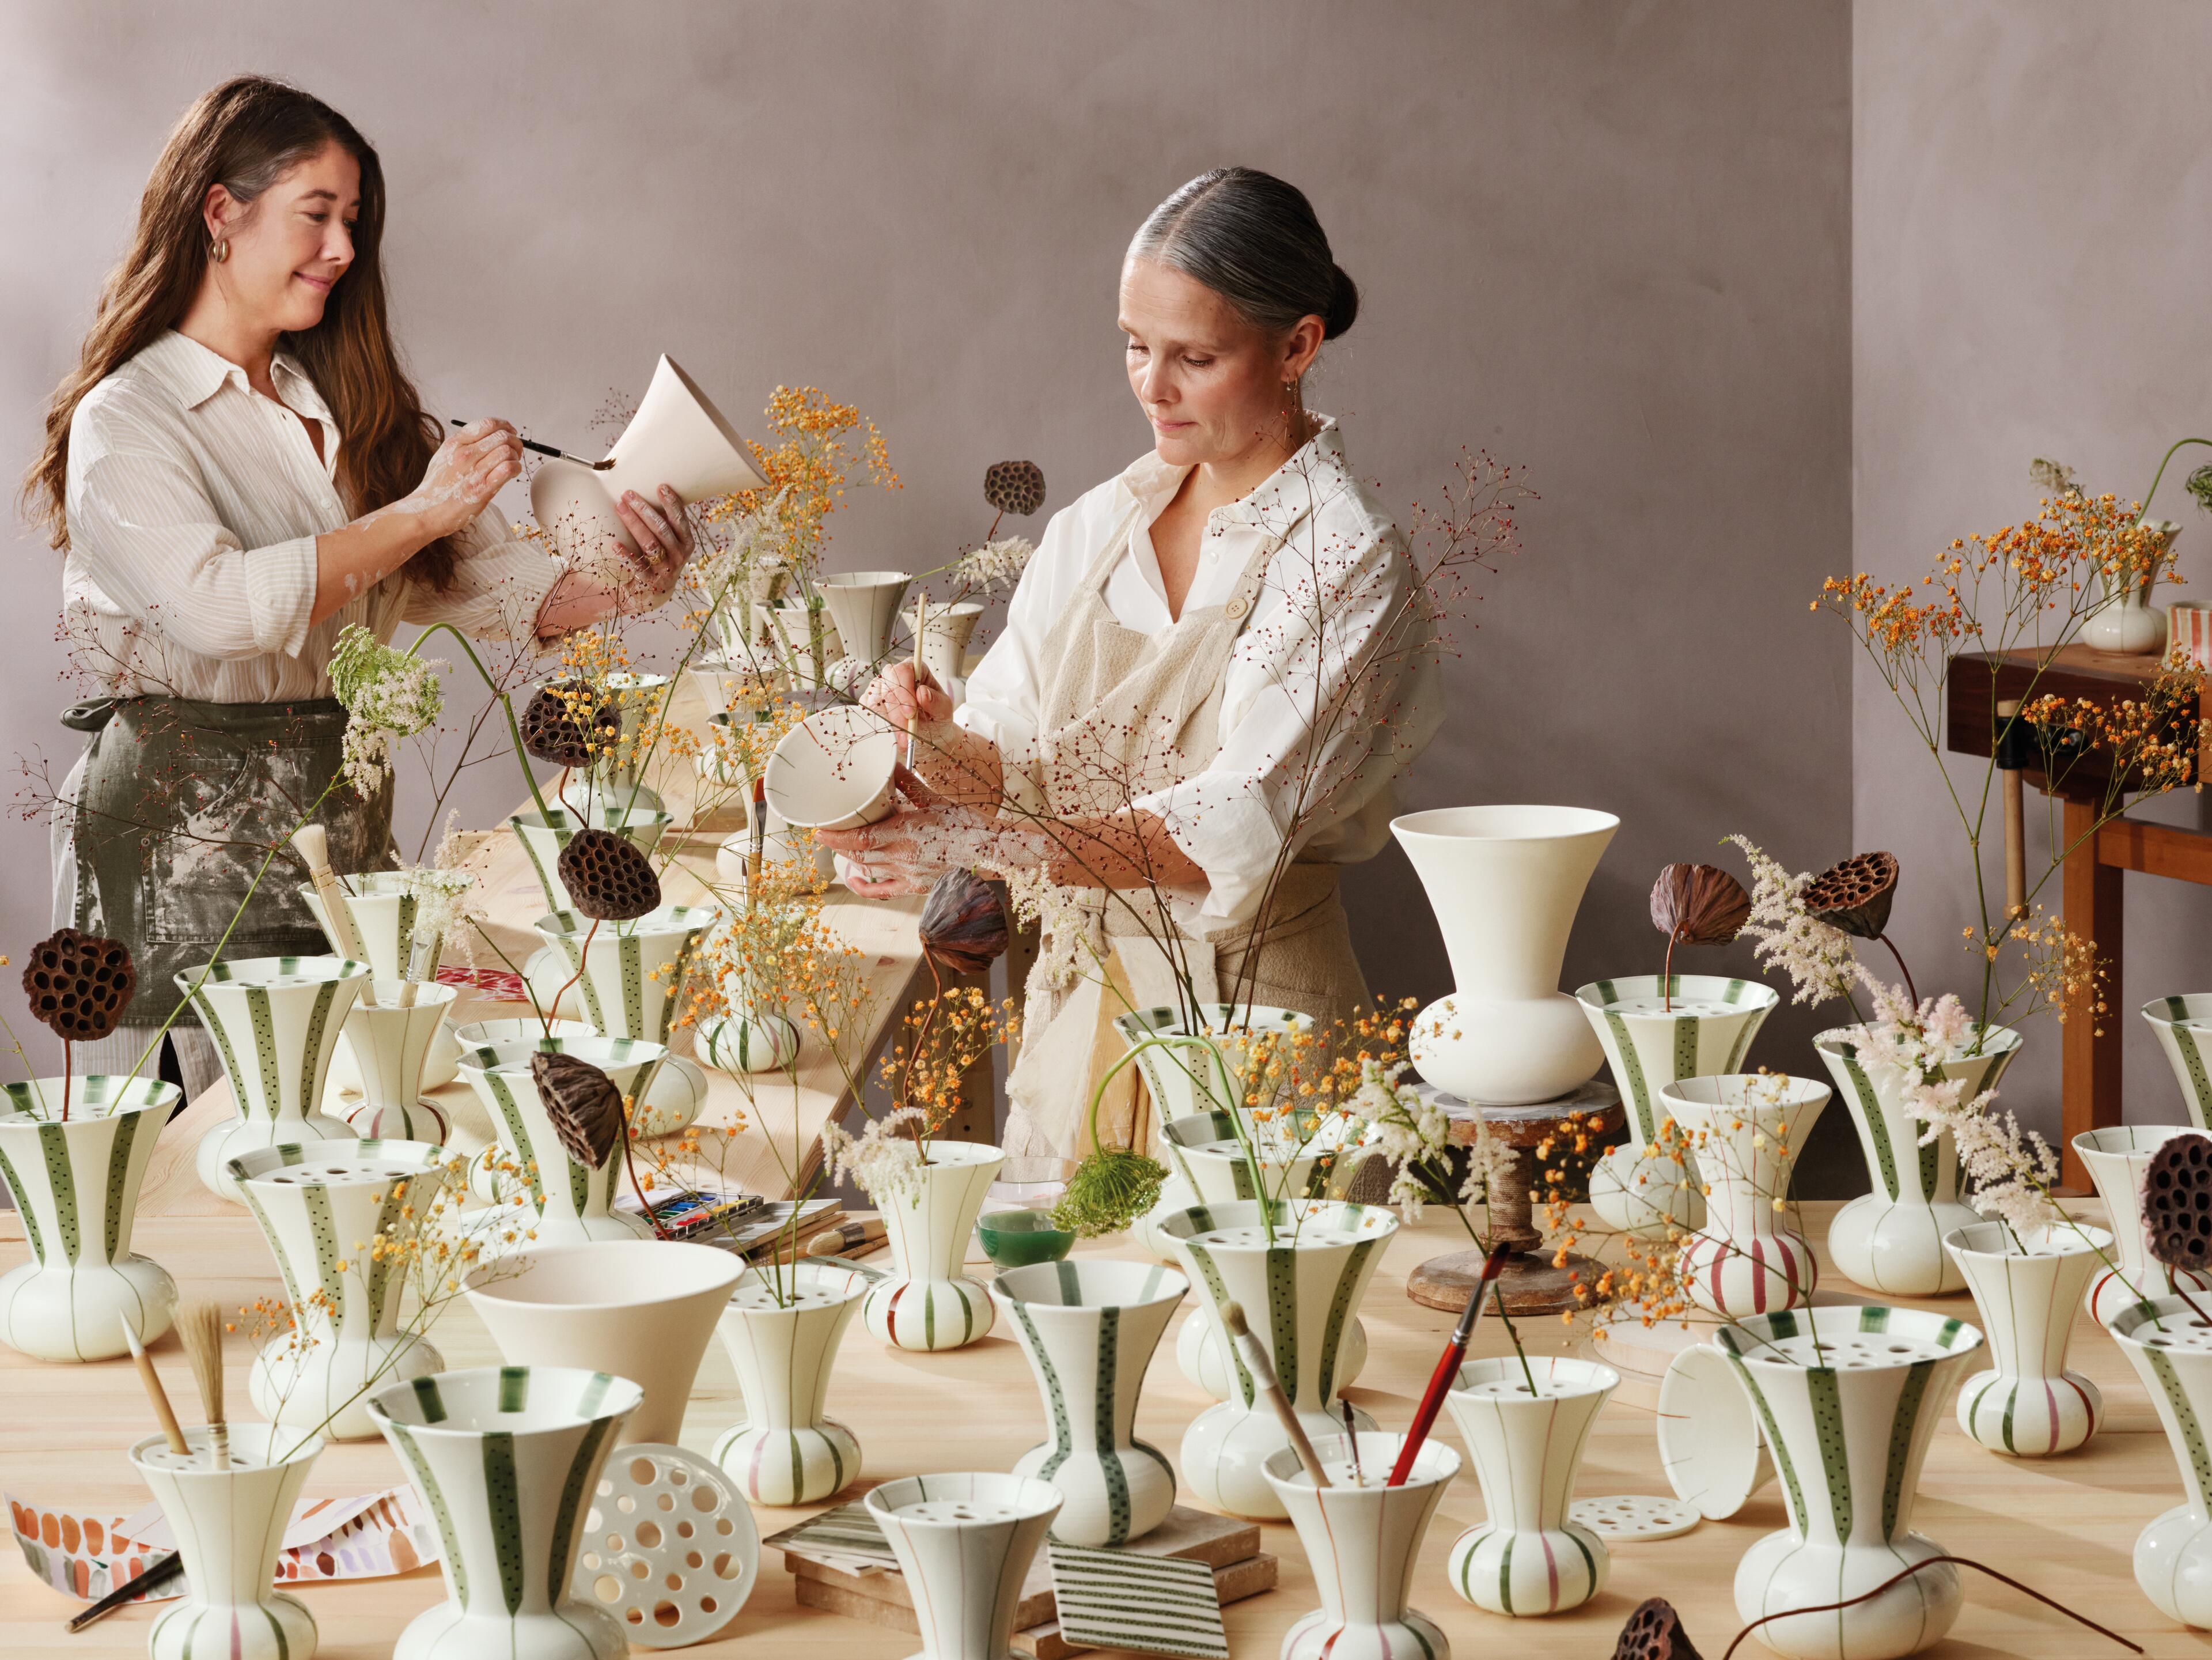 The designer duo Stilleben paints Signature vases from Kähler by hand